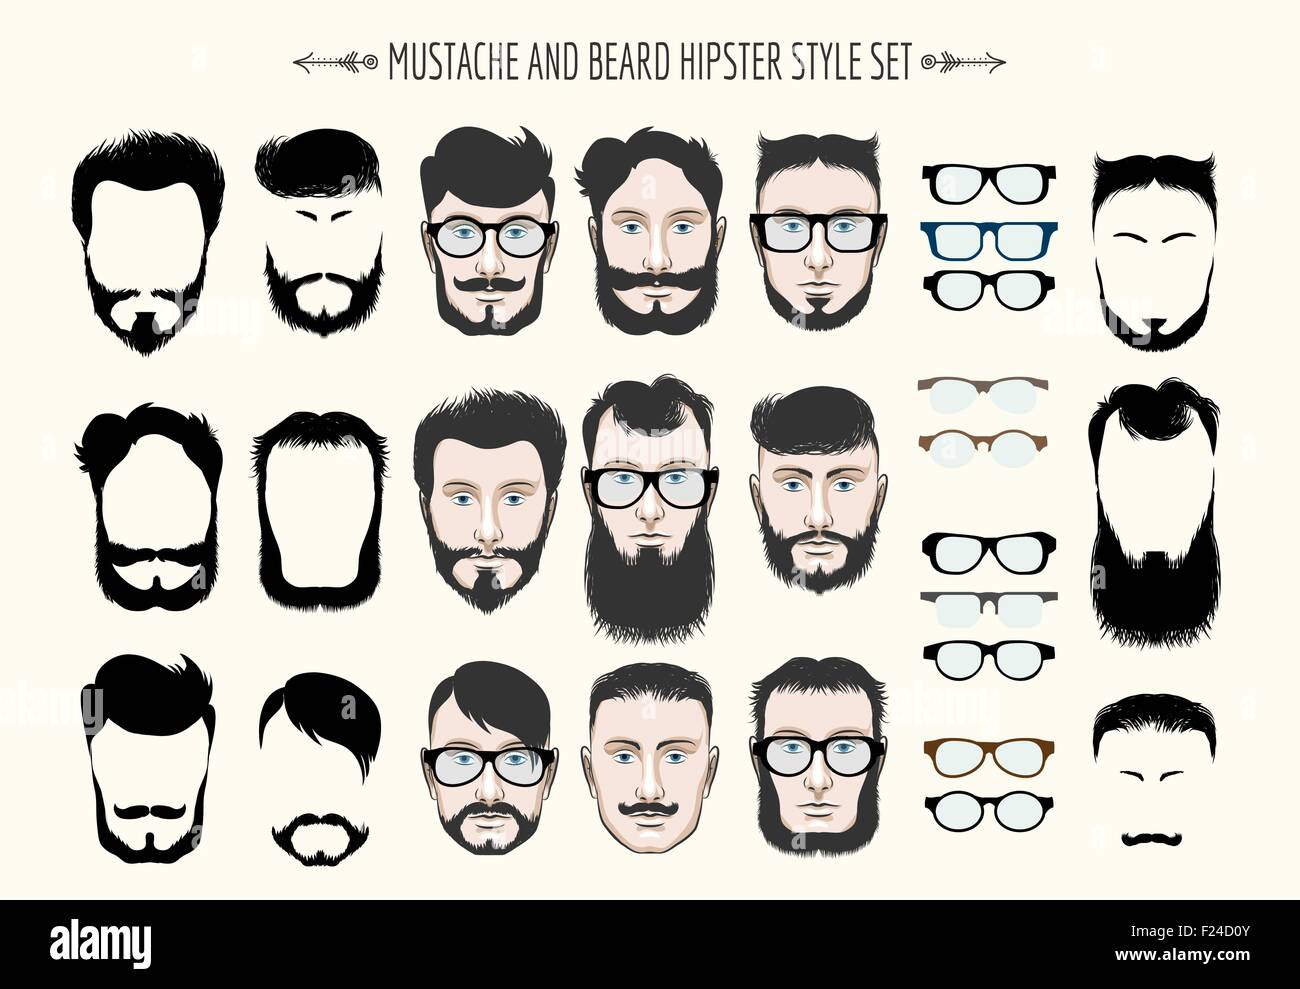 Hipster mustache and beard fashion silhouette. Set of nine various styles. Isolated on light background. Stock Vector